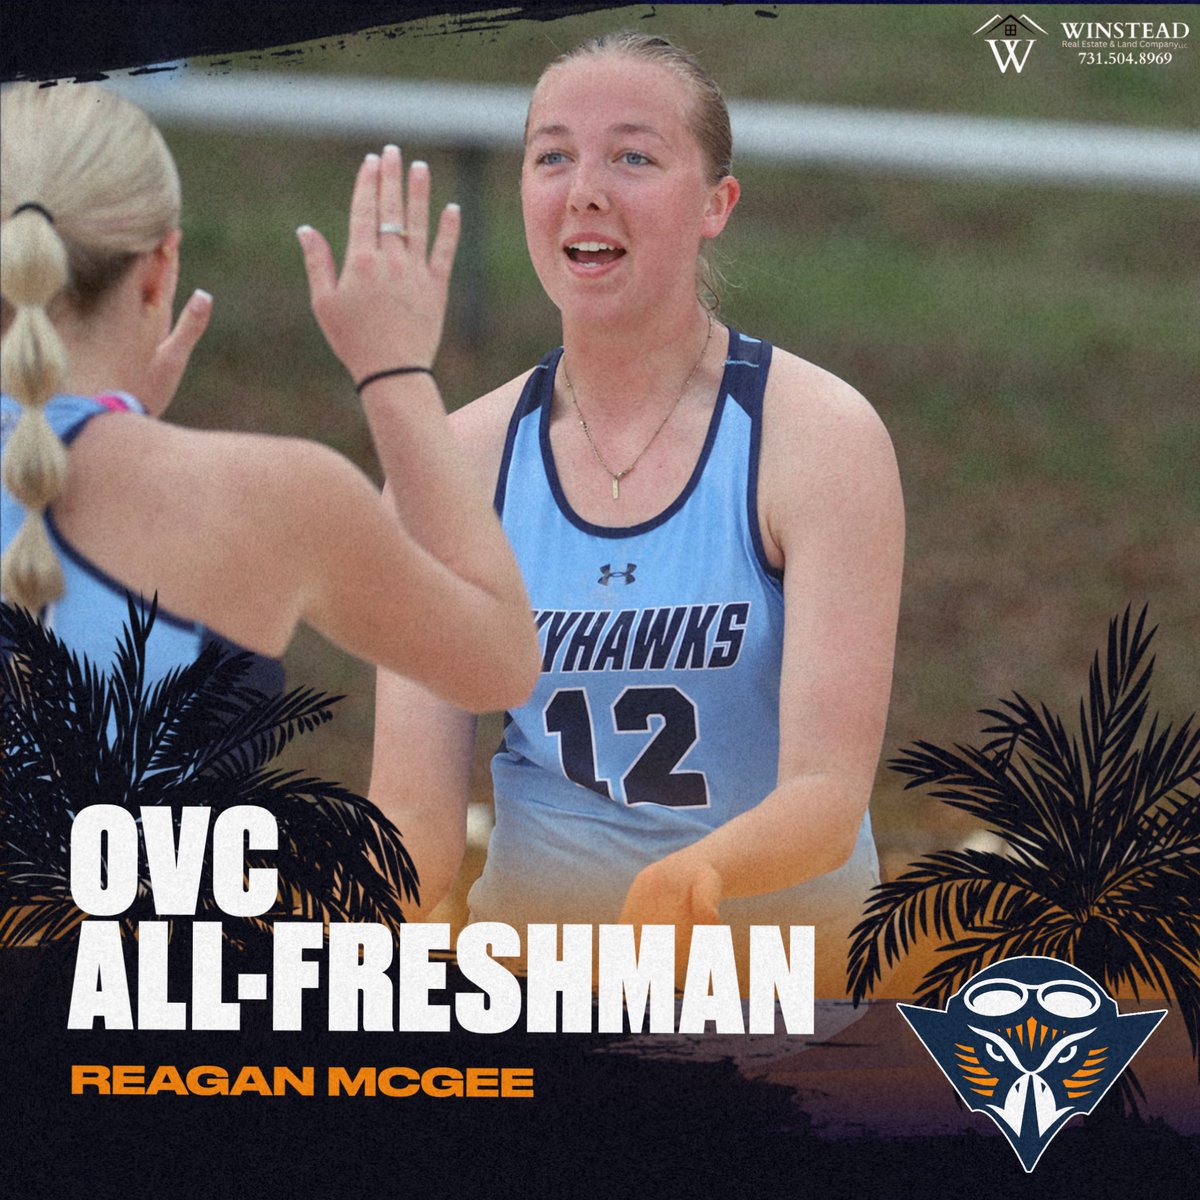 Congratulations to Skyhawk rookie Reagan McGee, who earned Ohio Valley Conference All-Freshman accolades this evening!

🏐 18-10 overall record
🏐 9-0 OVC record

#MartinMade | #OVCit